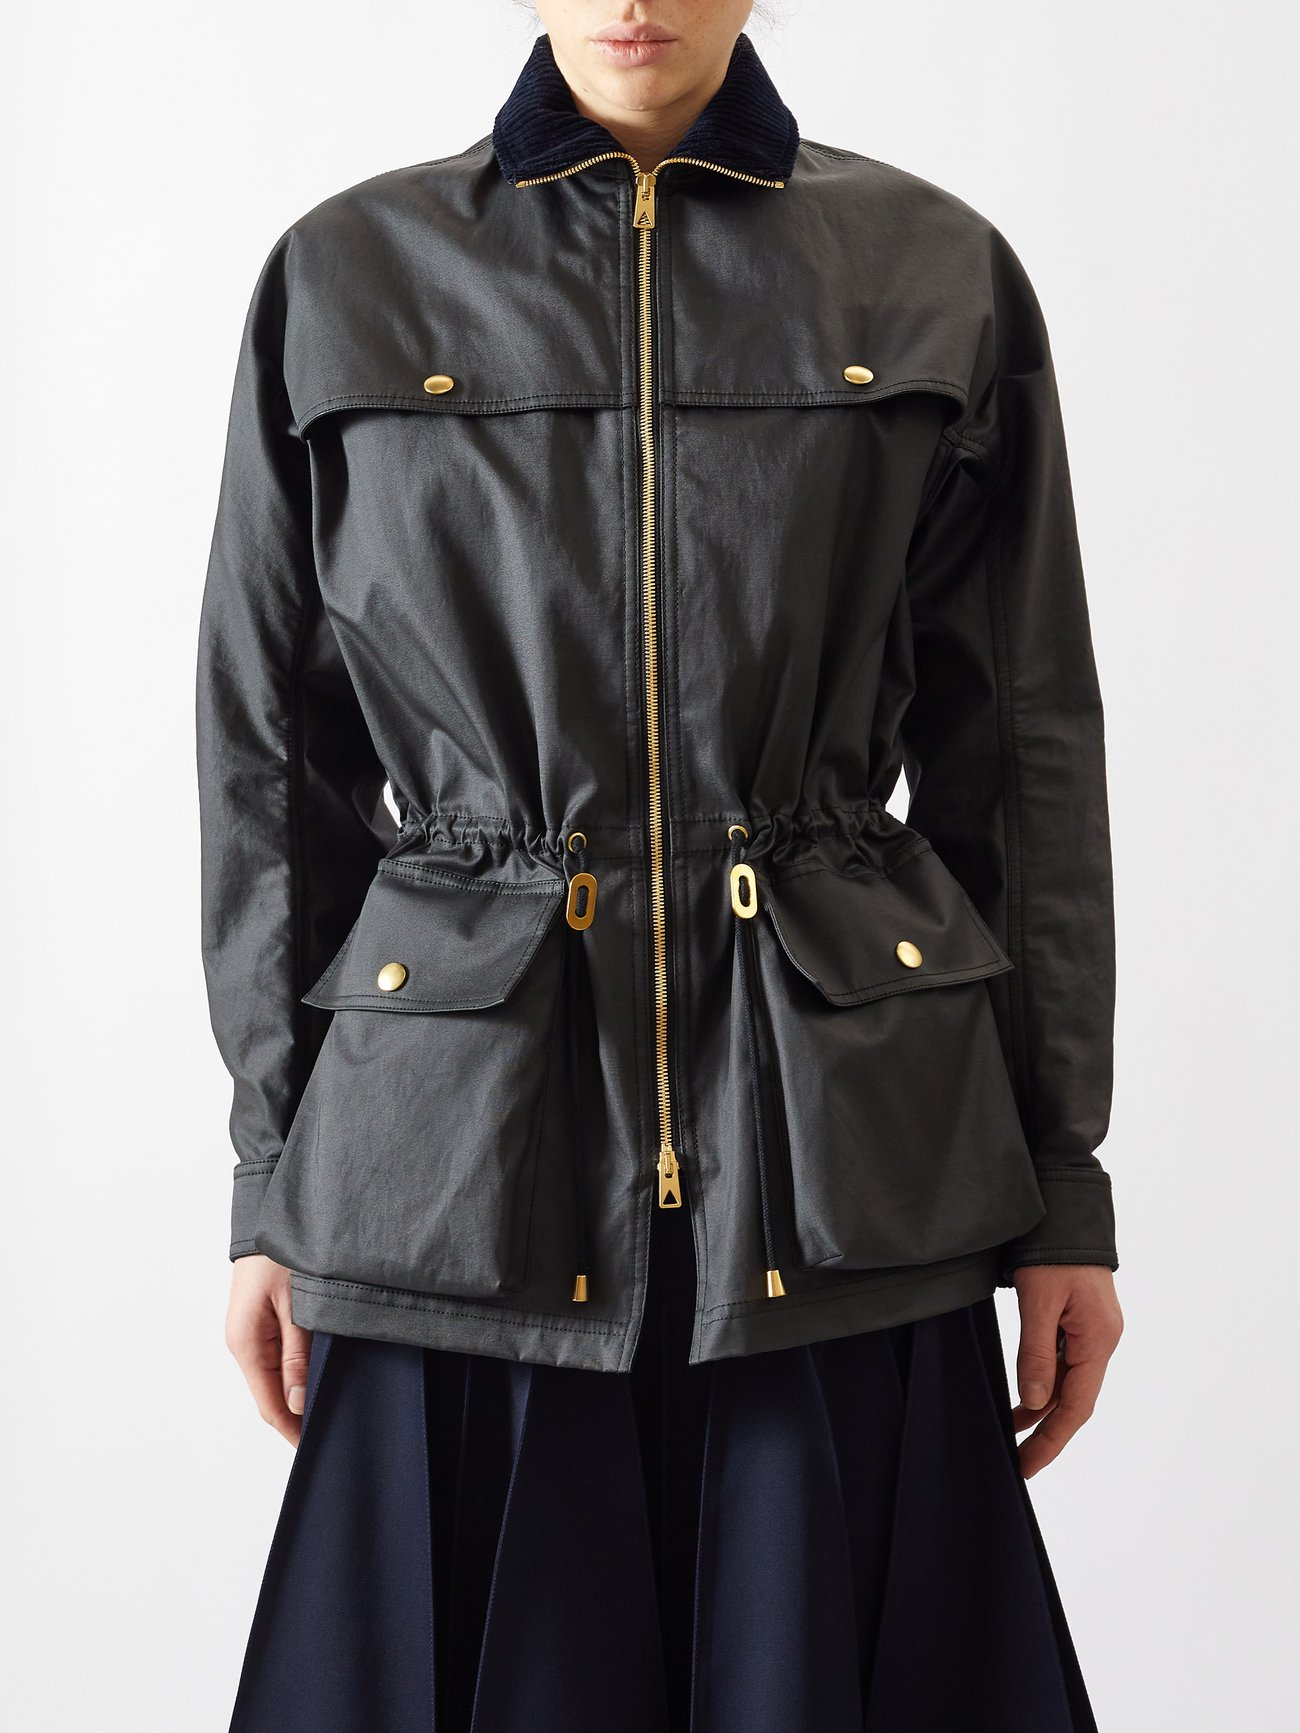 Trending Winter Coats 2023 2024 - Bottega Veneta’s adds a utilitarian flair through the generous flap pockets of this black parka – cinch the waist with the drawstrings for a personalised fit.